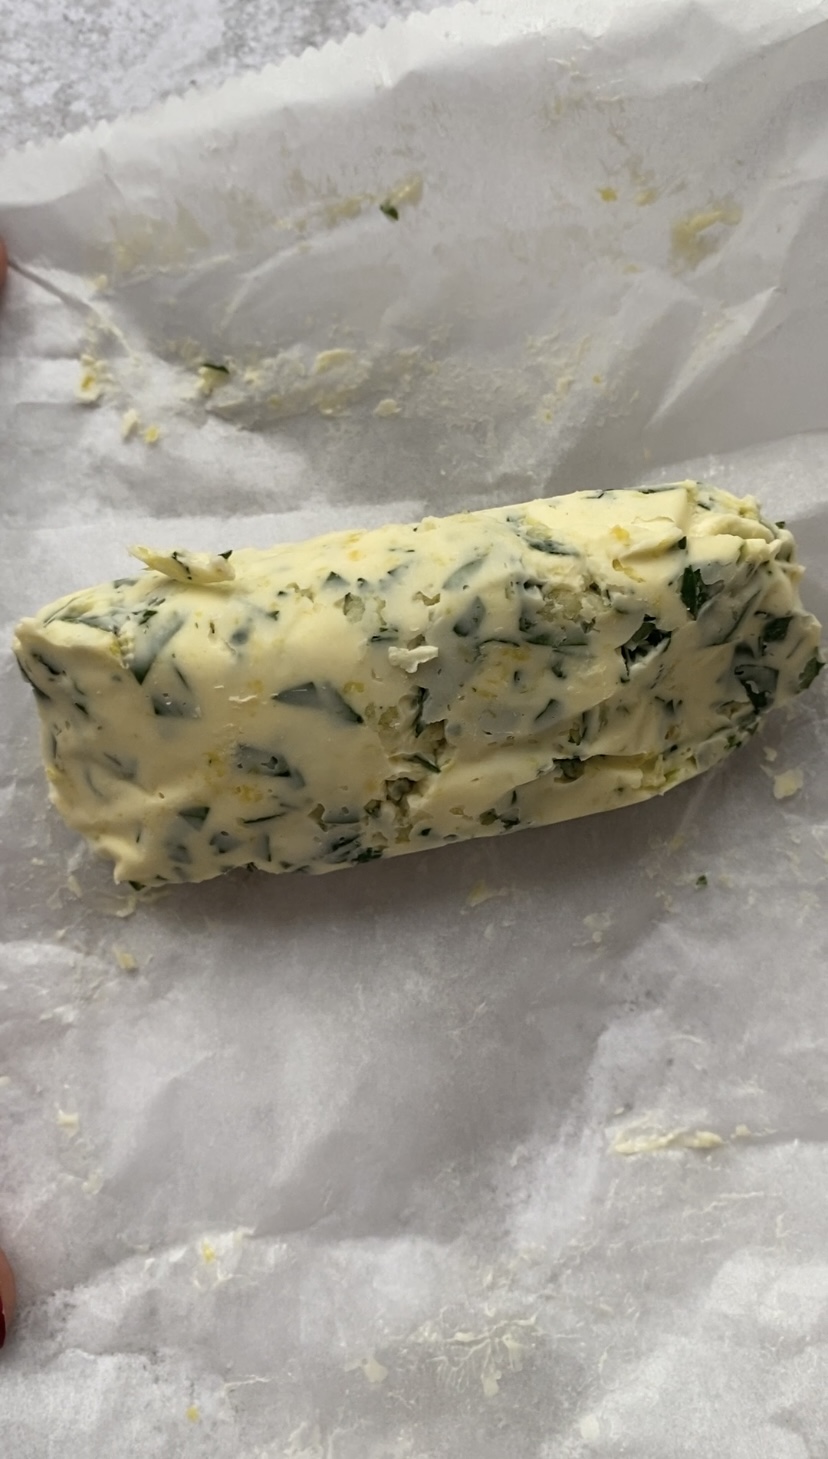 Herb butter, firm, after 5 minutes in the freezer.